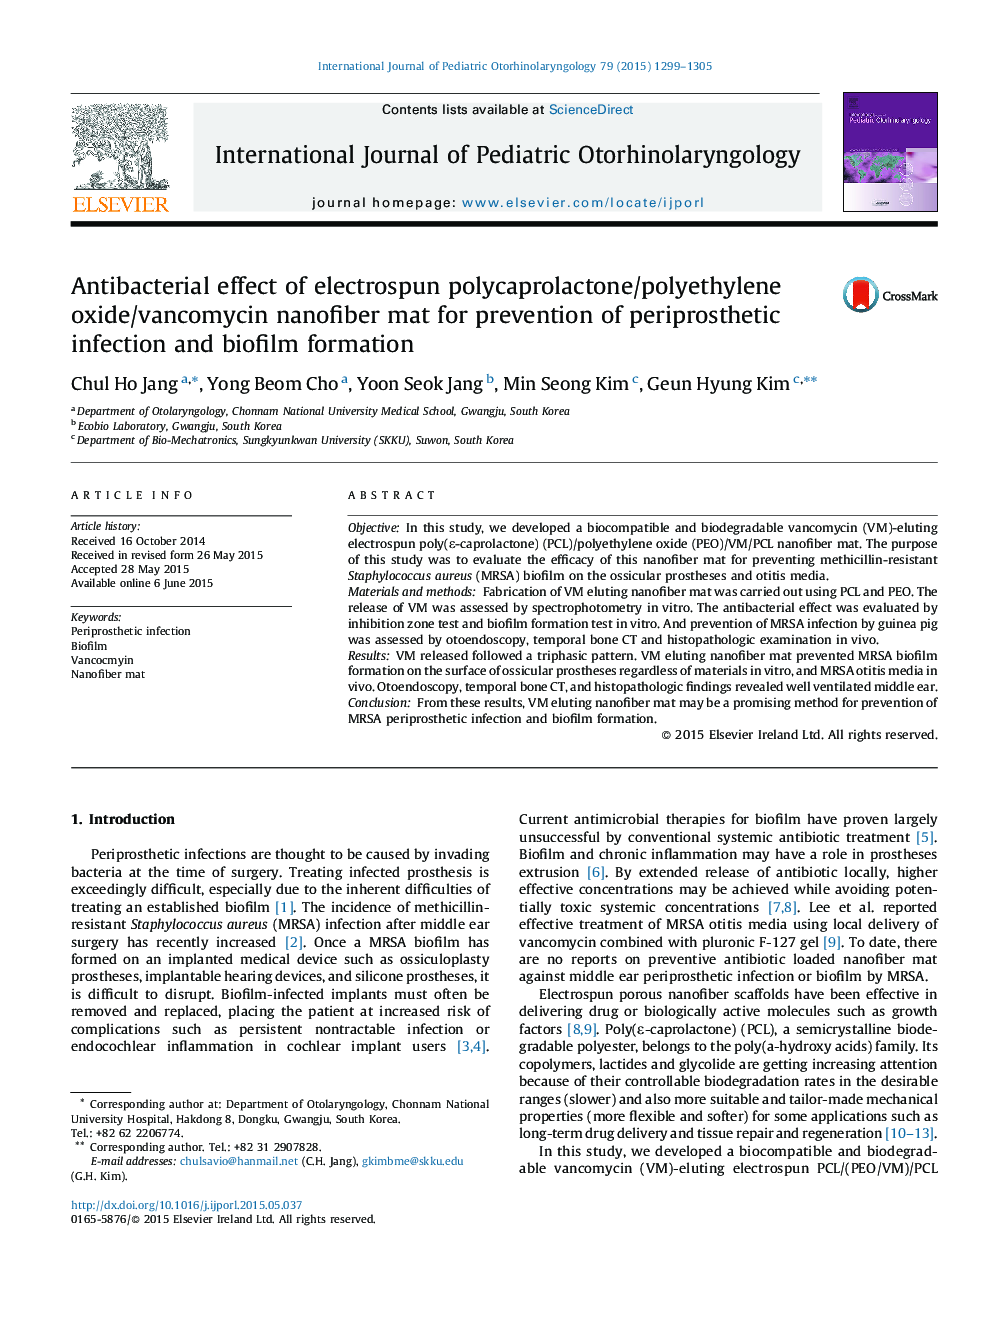 Antibacterial effect of electrospun polycaprolactone/polyethylene oxide/vancomycin nanofiber mat for prevention of periprosthetic infection and biofilm formation